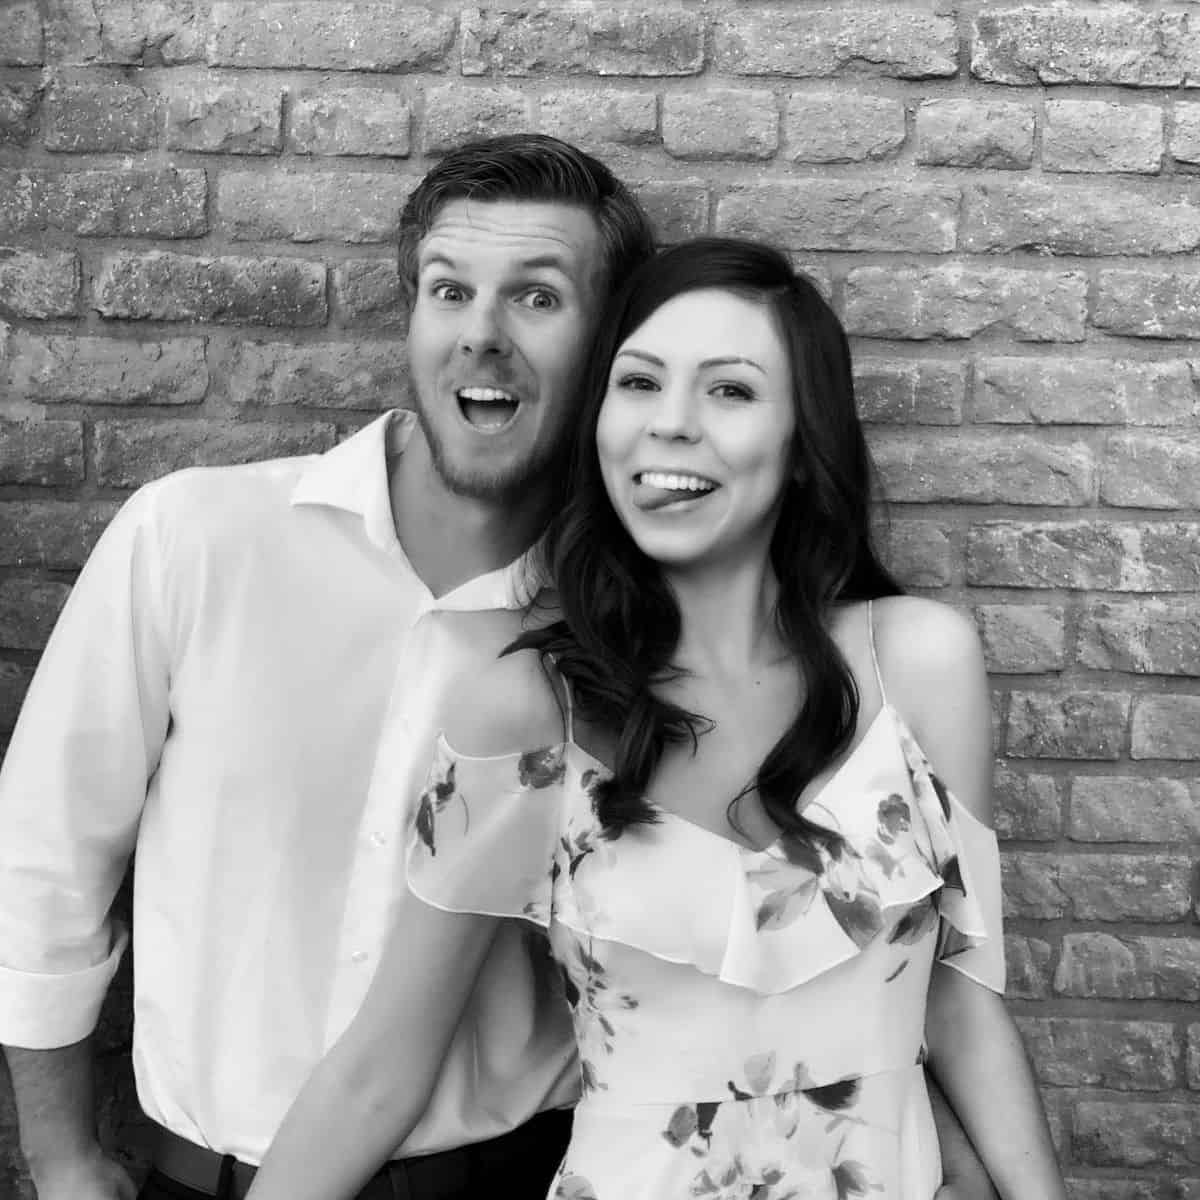 A couple posing for a photo booth photo in front of a brick wall in black and white picture